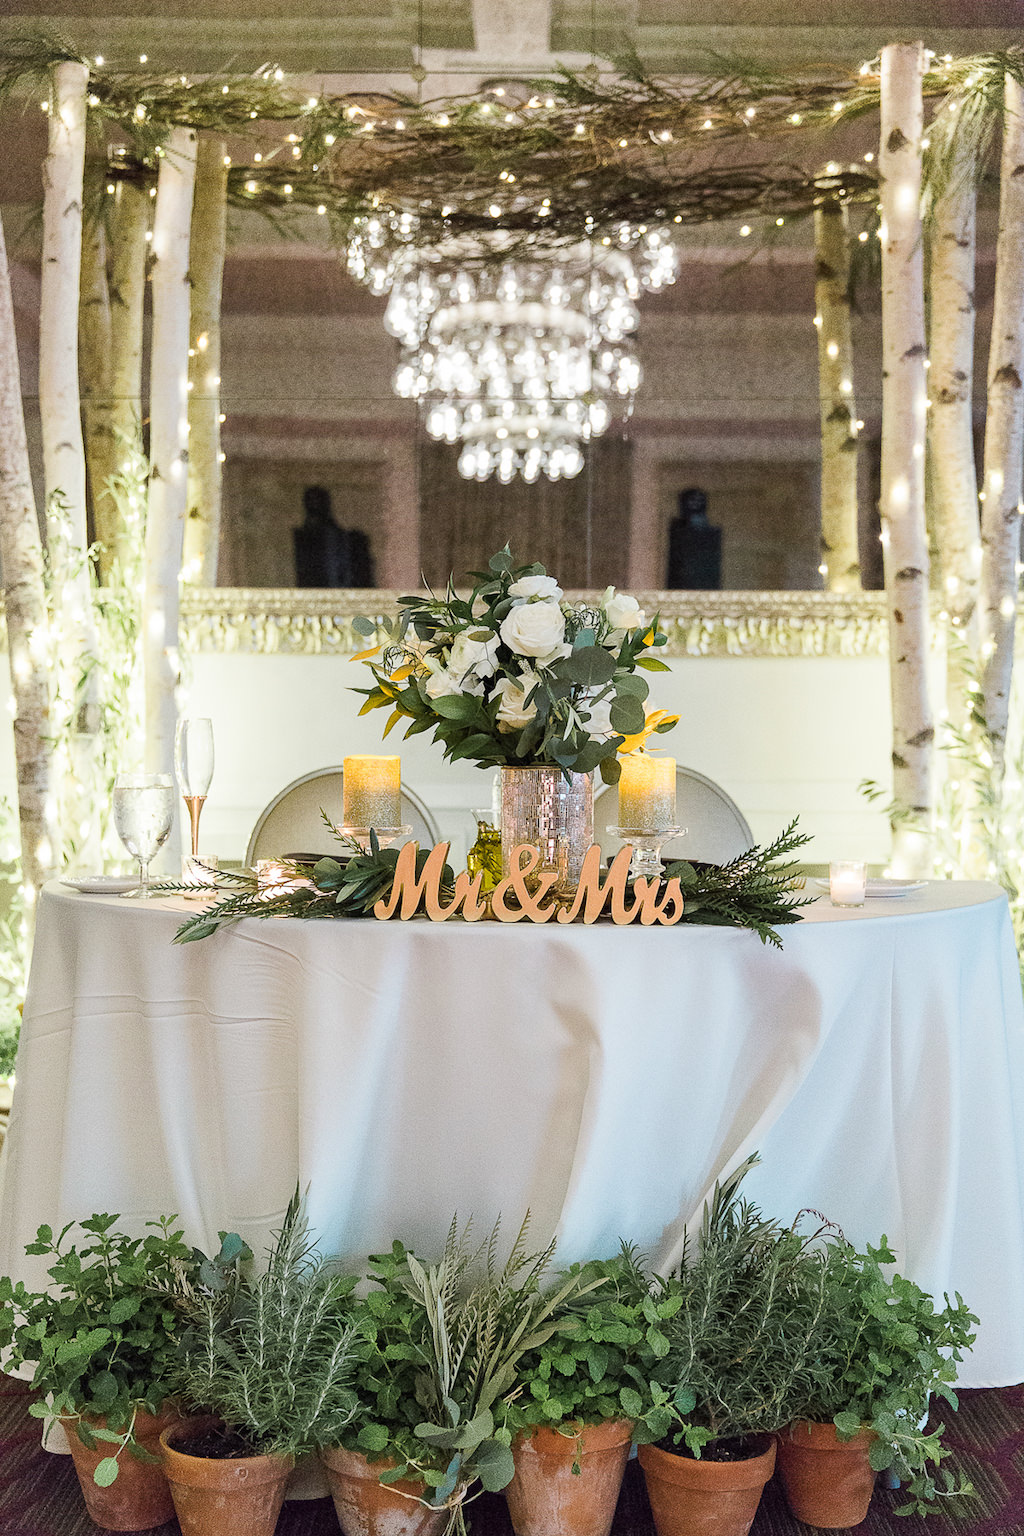 Natural Organic Wedding Reception Sweetheart Bride and Groom Table with Stylish Gold Mr and Mrs Letters, Herbs Growing in Ceramic Pots, Greenery and Silver Pillar Candle Table Decor, and White Birch Tree and Branches with String Lights Arch | Downtown St Pete Wedding Venue The Birchwood